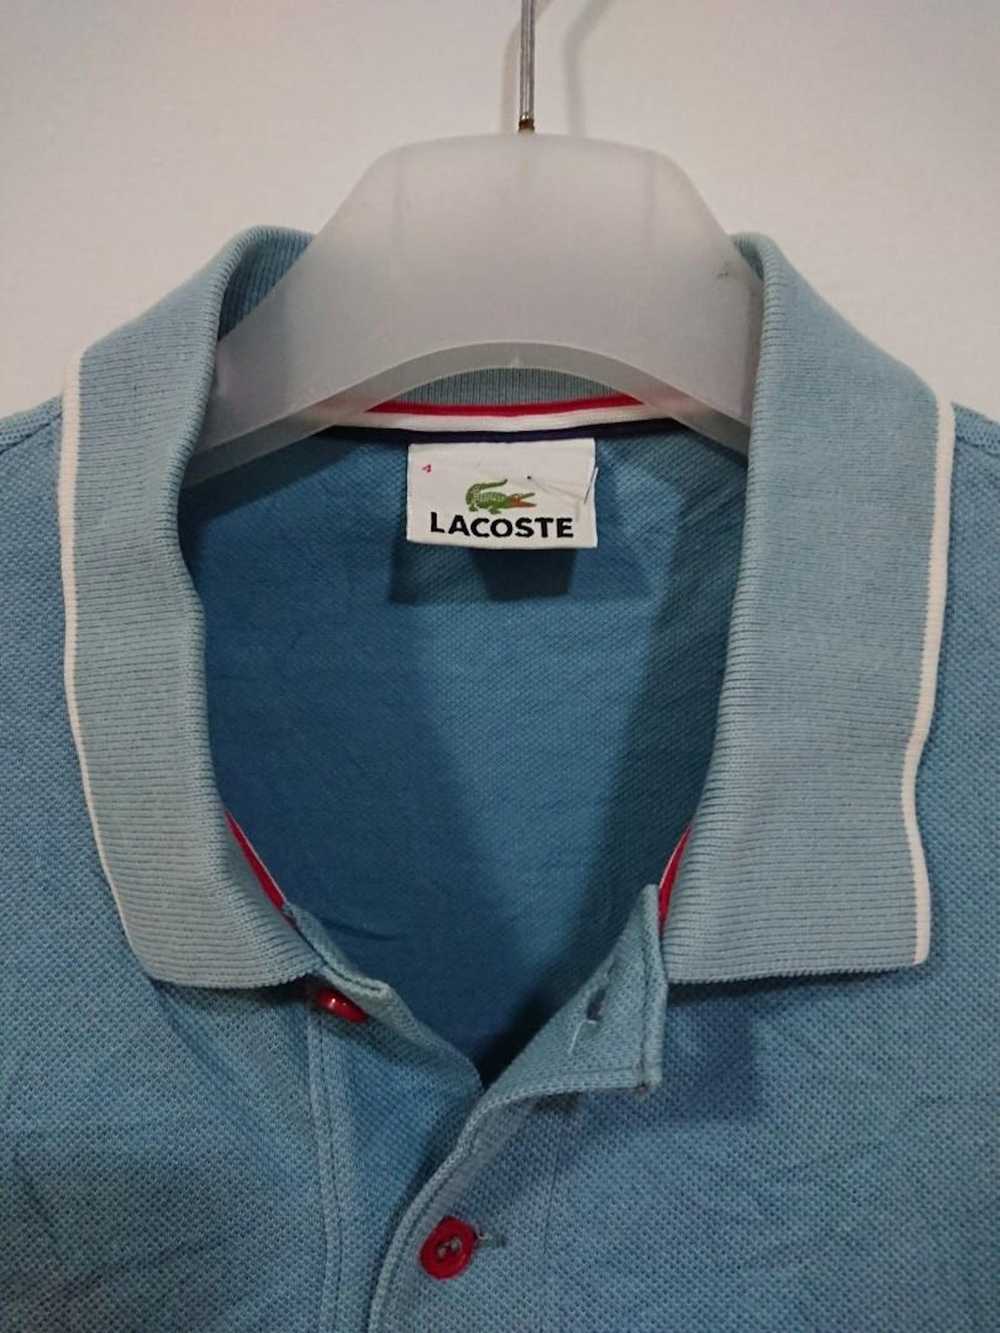 Lacoste Lacoste polos shirt size 4 - image 3